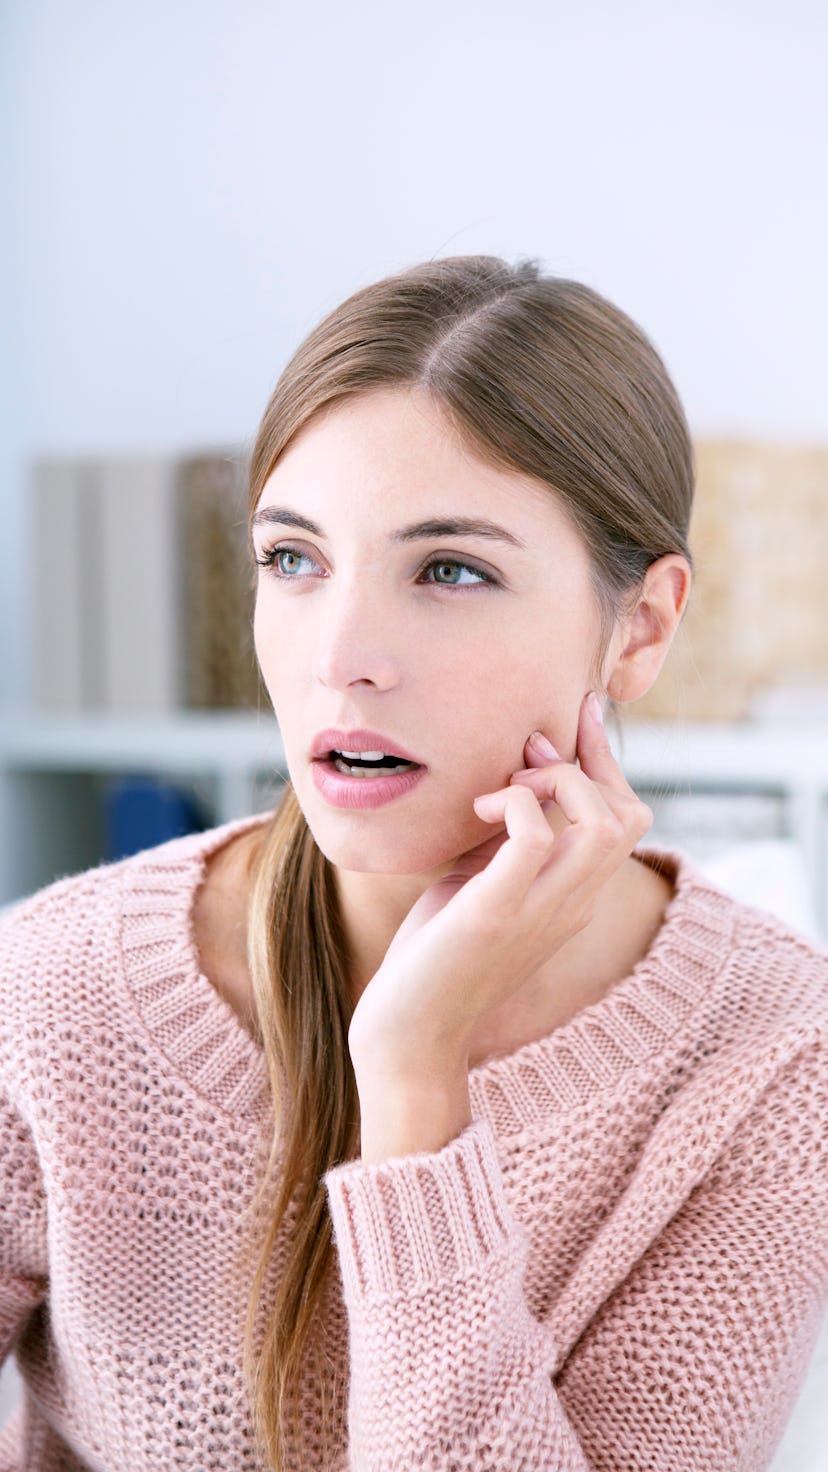 Find jaw stretches to alleviate TMJ pain.